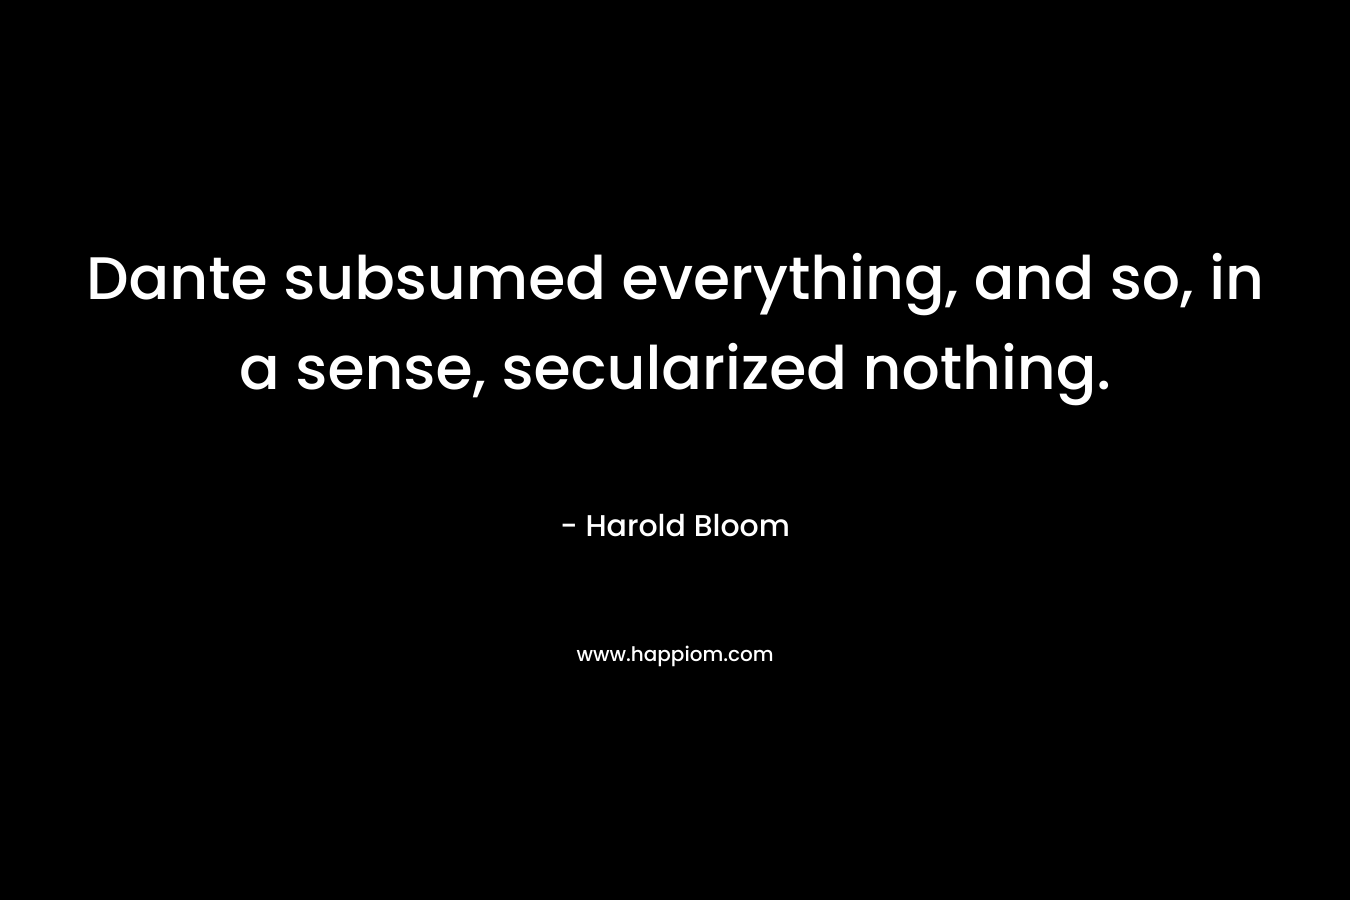 Dante subsumed everything, and so, in a sense, secularized nothing. – Harold Bloom